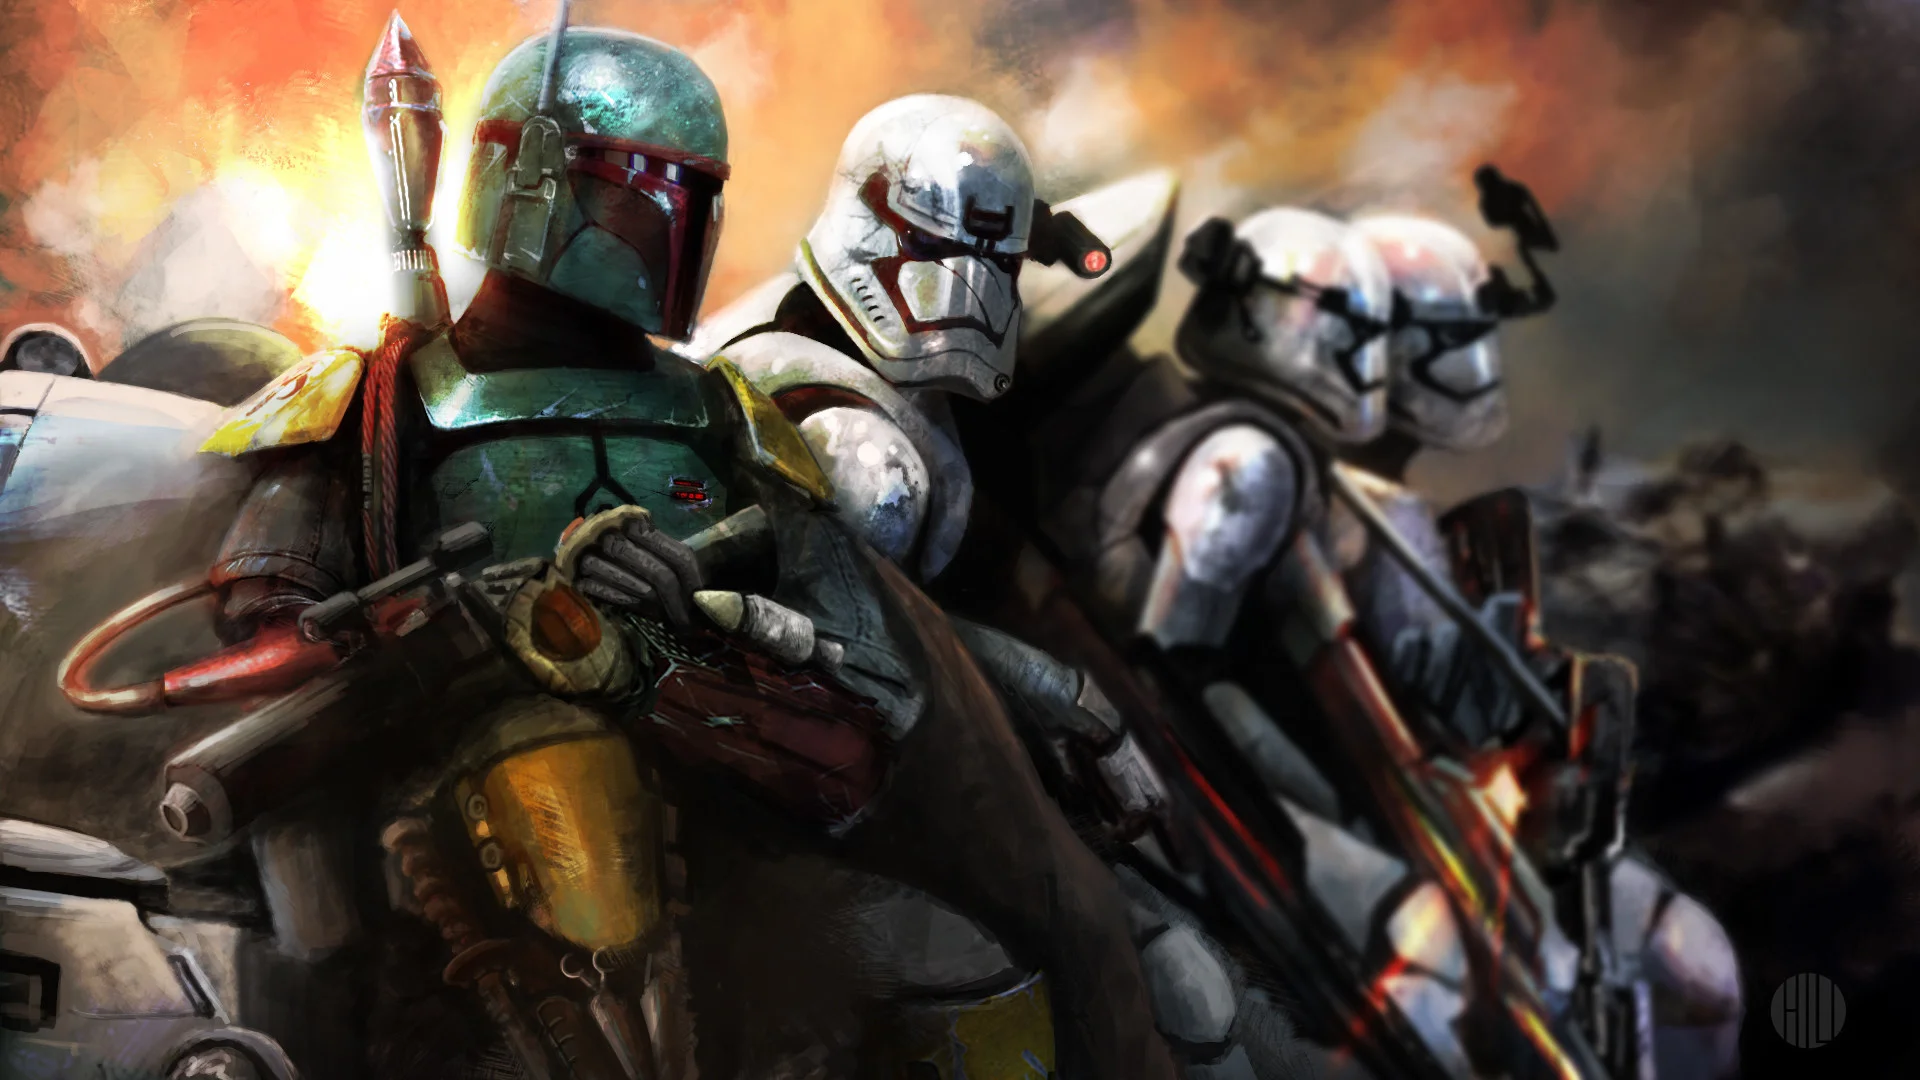 Boba Fett with First Order ERT squad